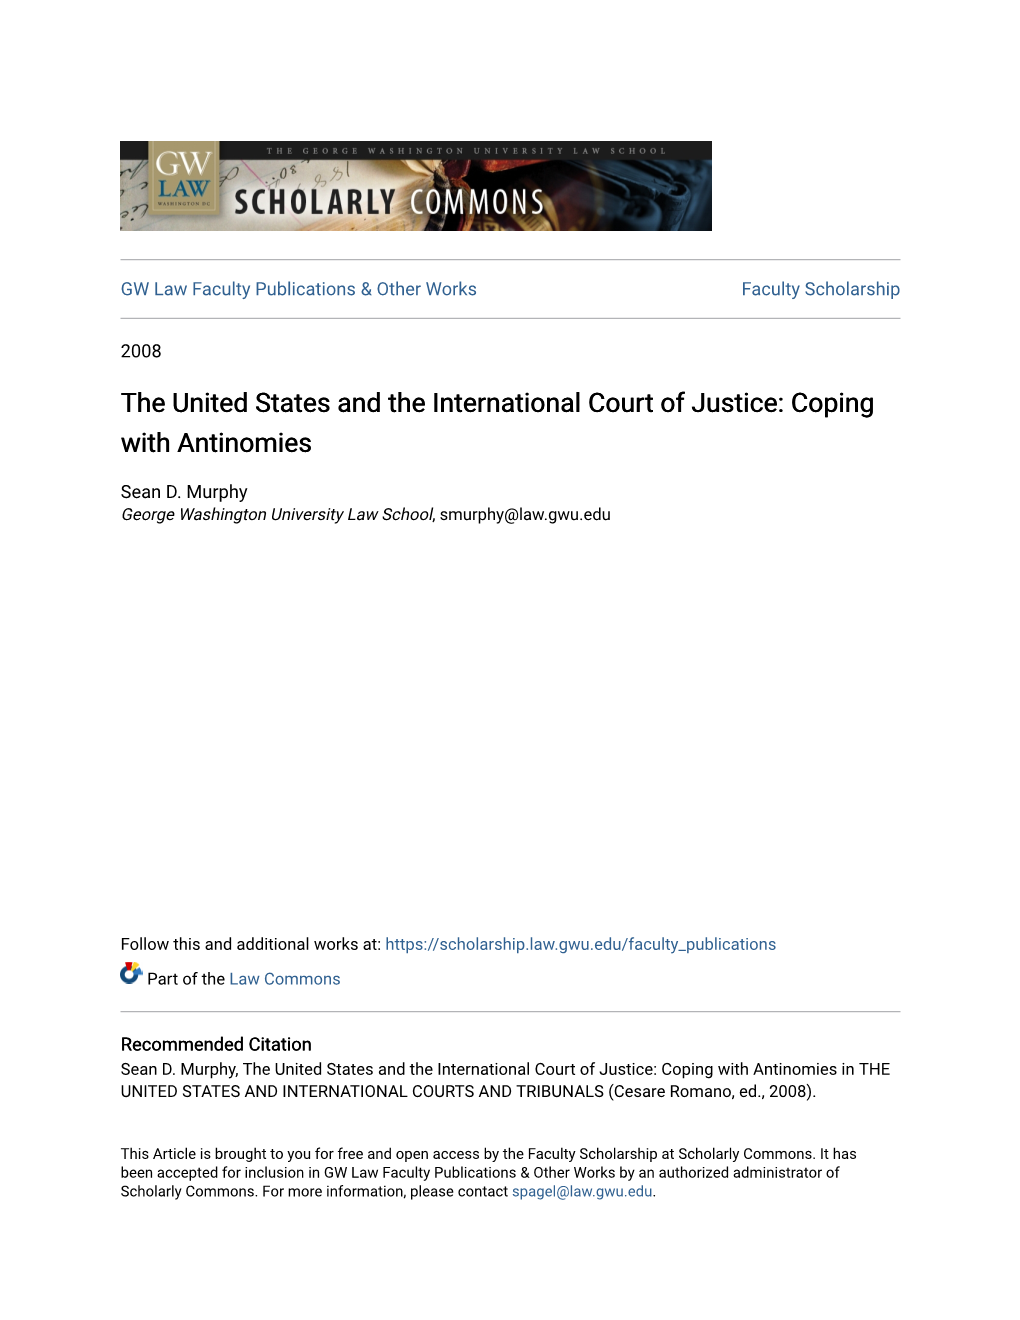 The United States and the International Court of Justice: Coping with Antinomies